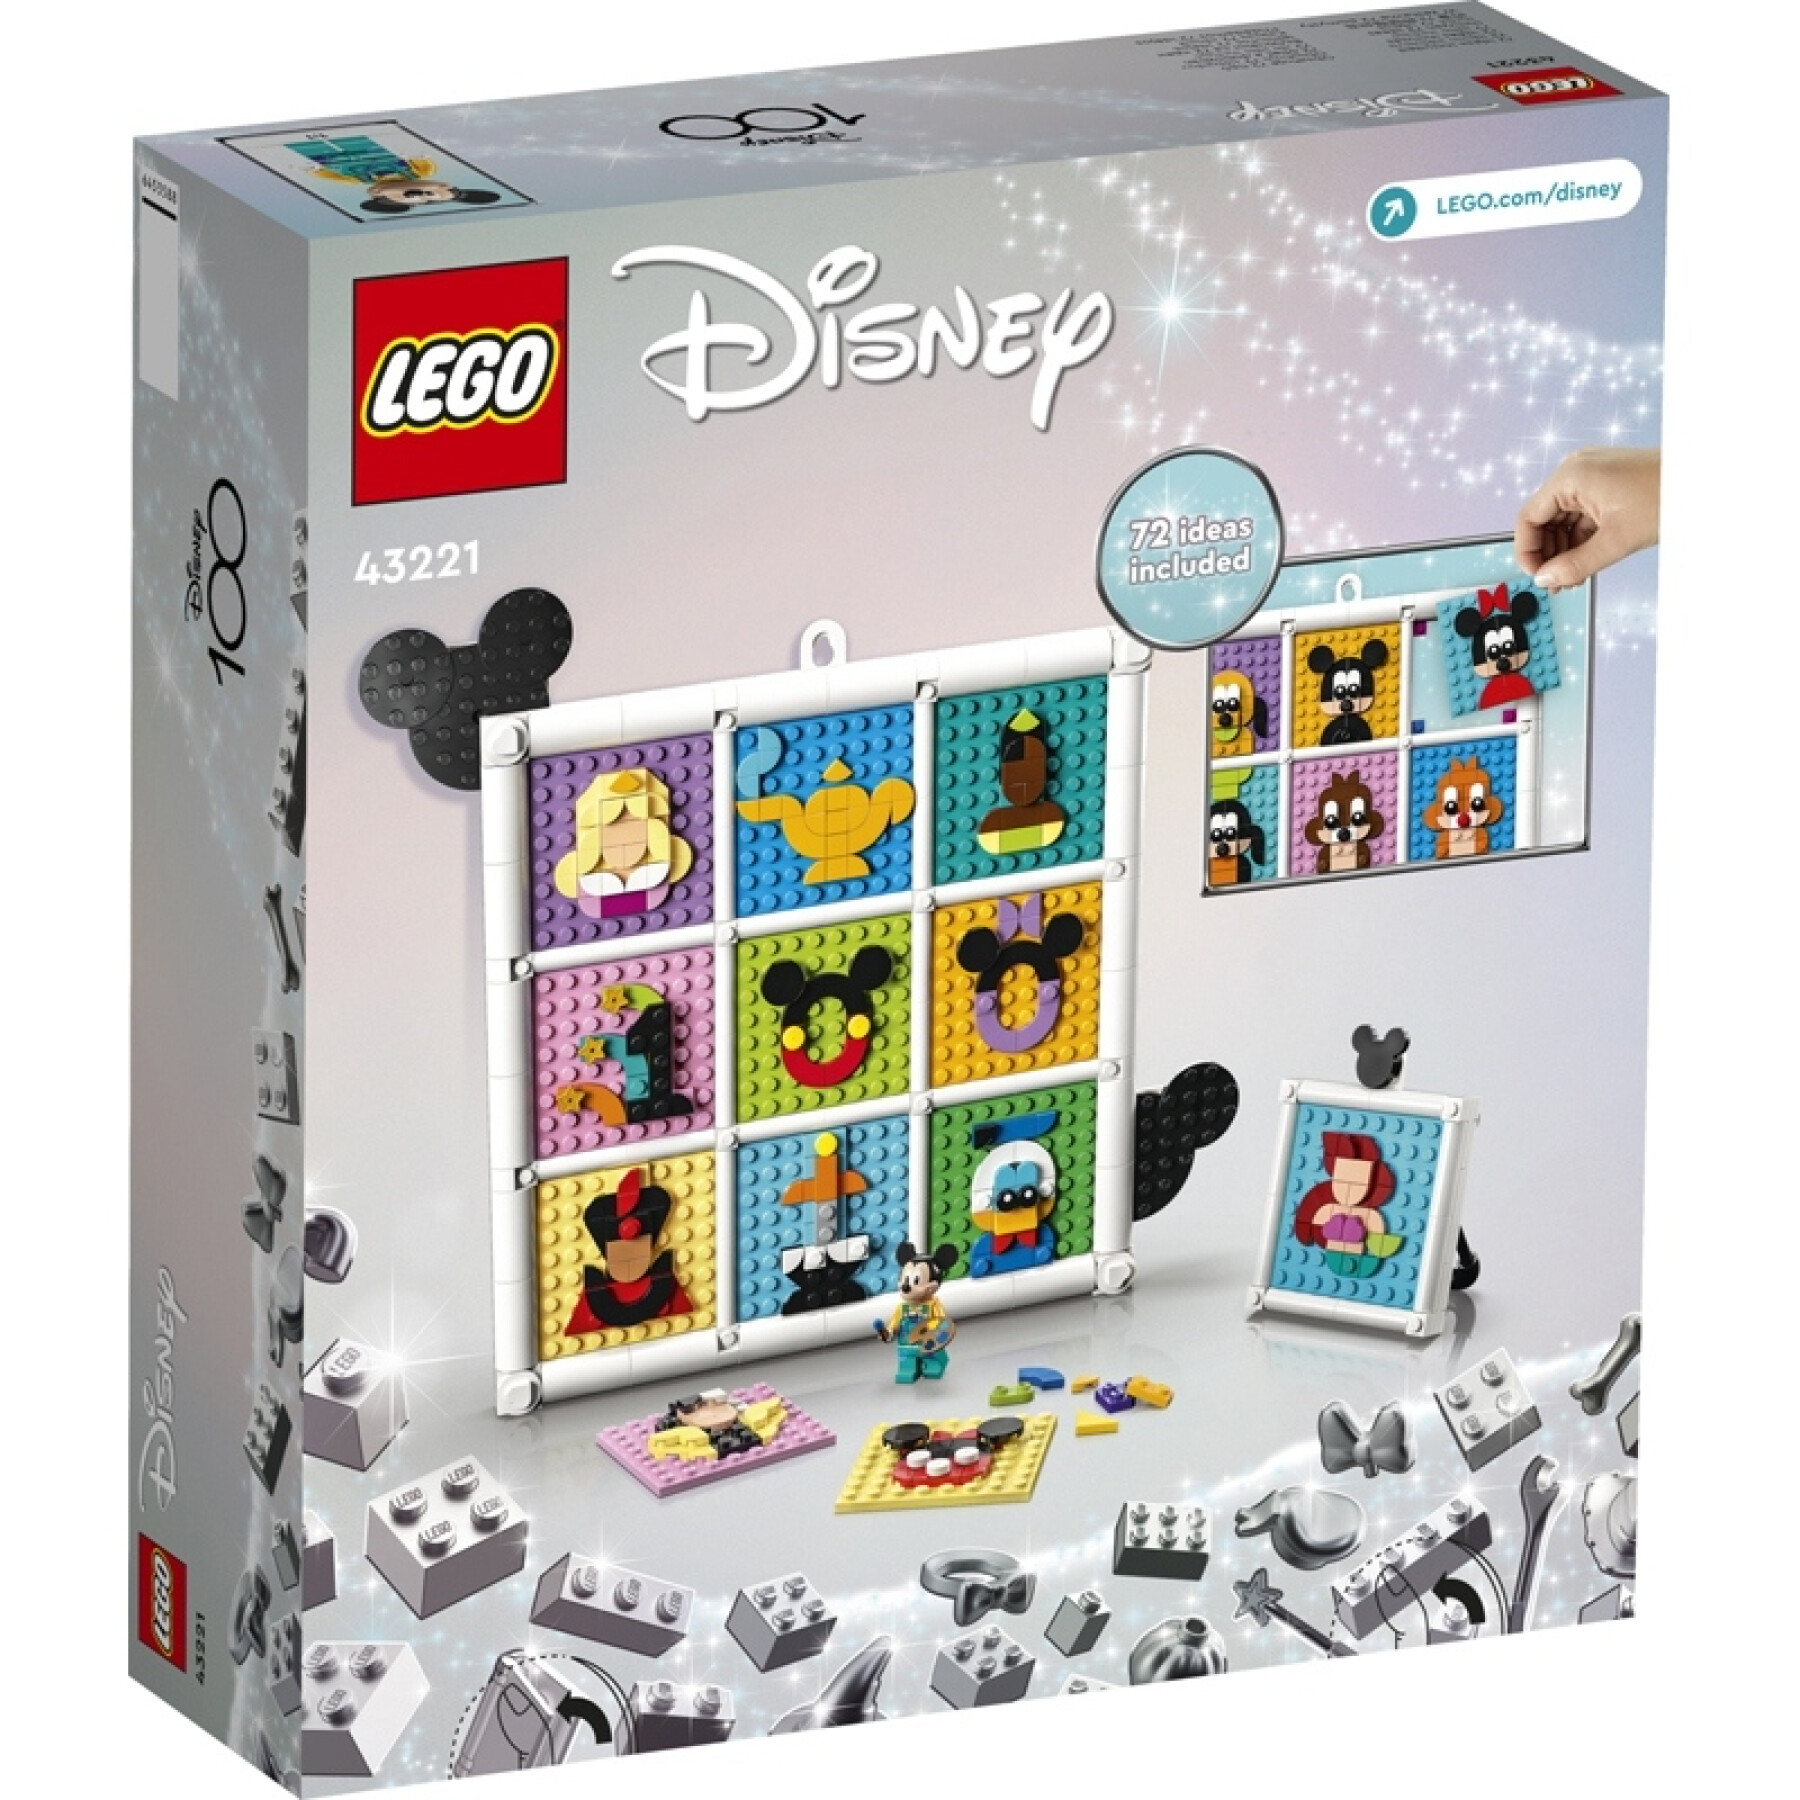 Building sets 100 years icons Lego Disney